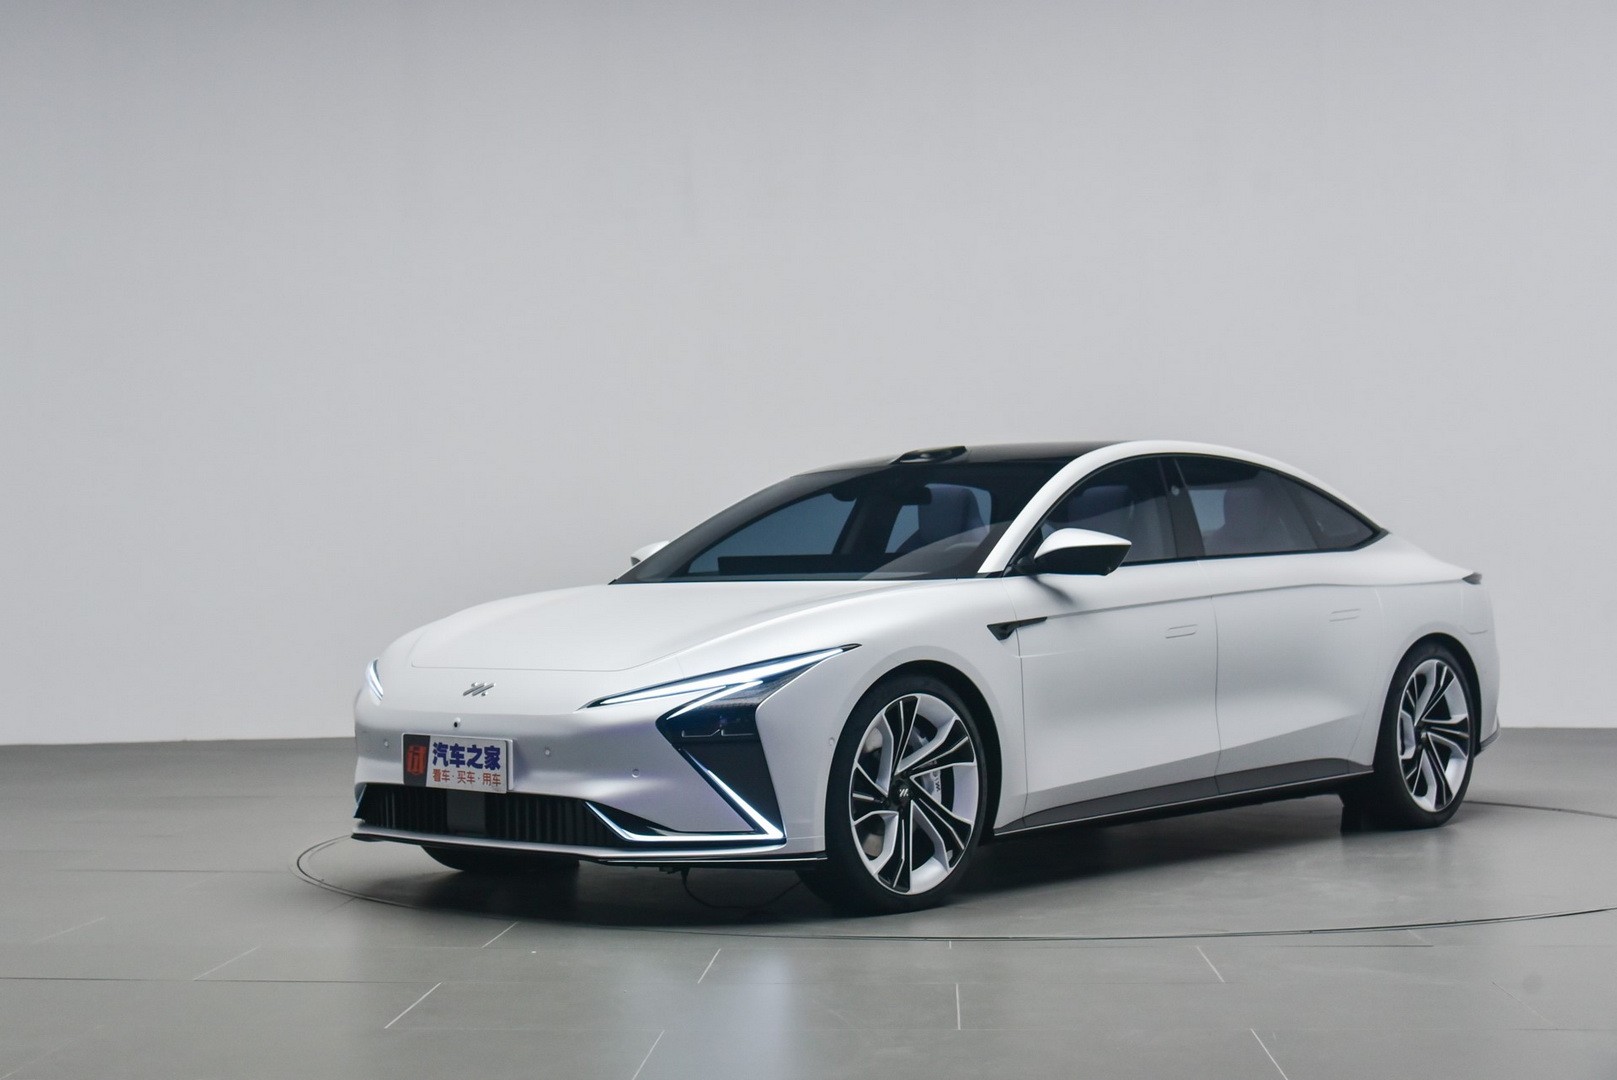 IM L7 Is China’s Latest Luxury EV Saloon, Will Take You to 62 MPH in 3.